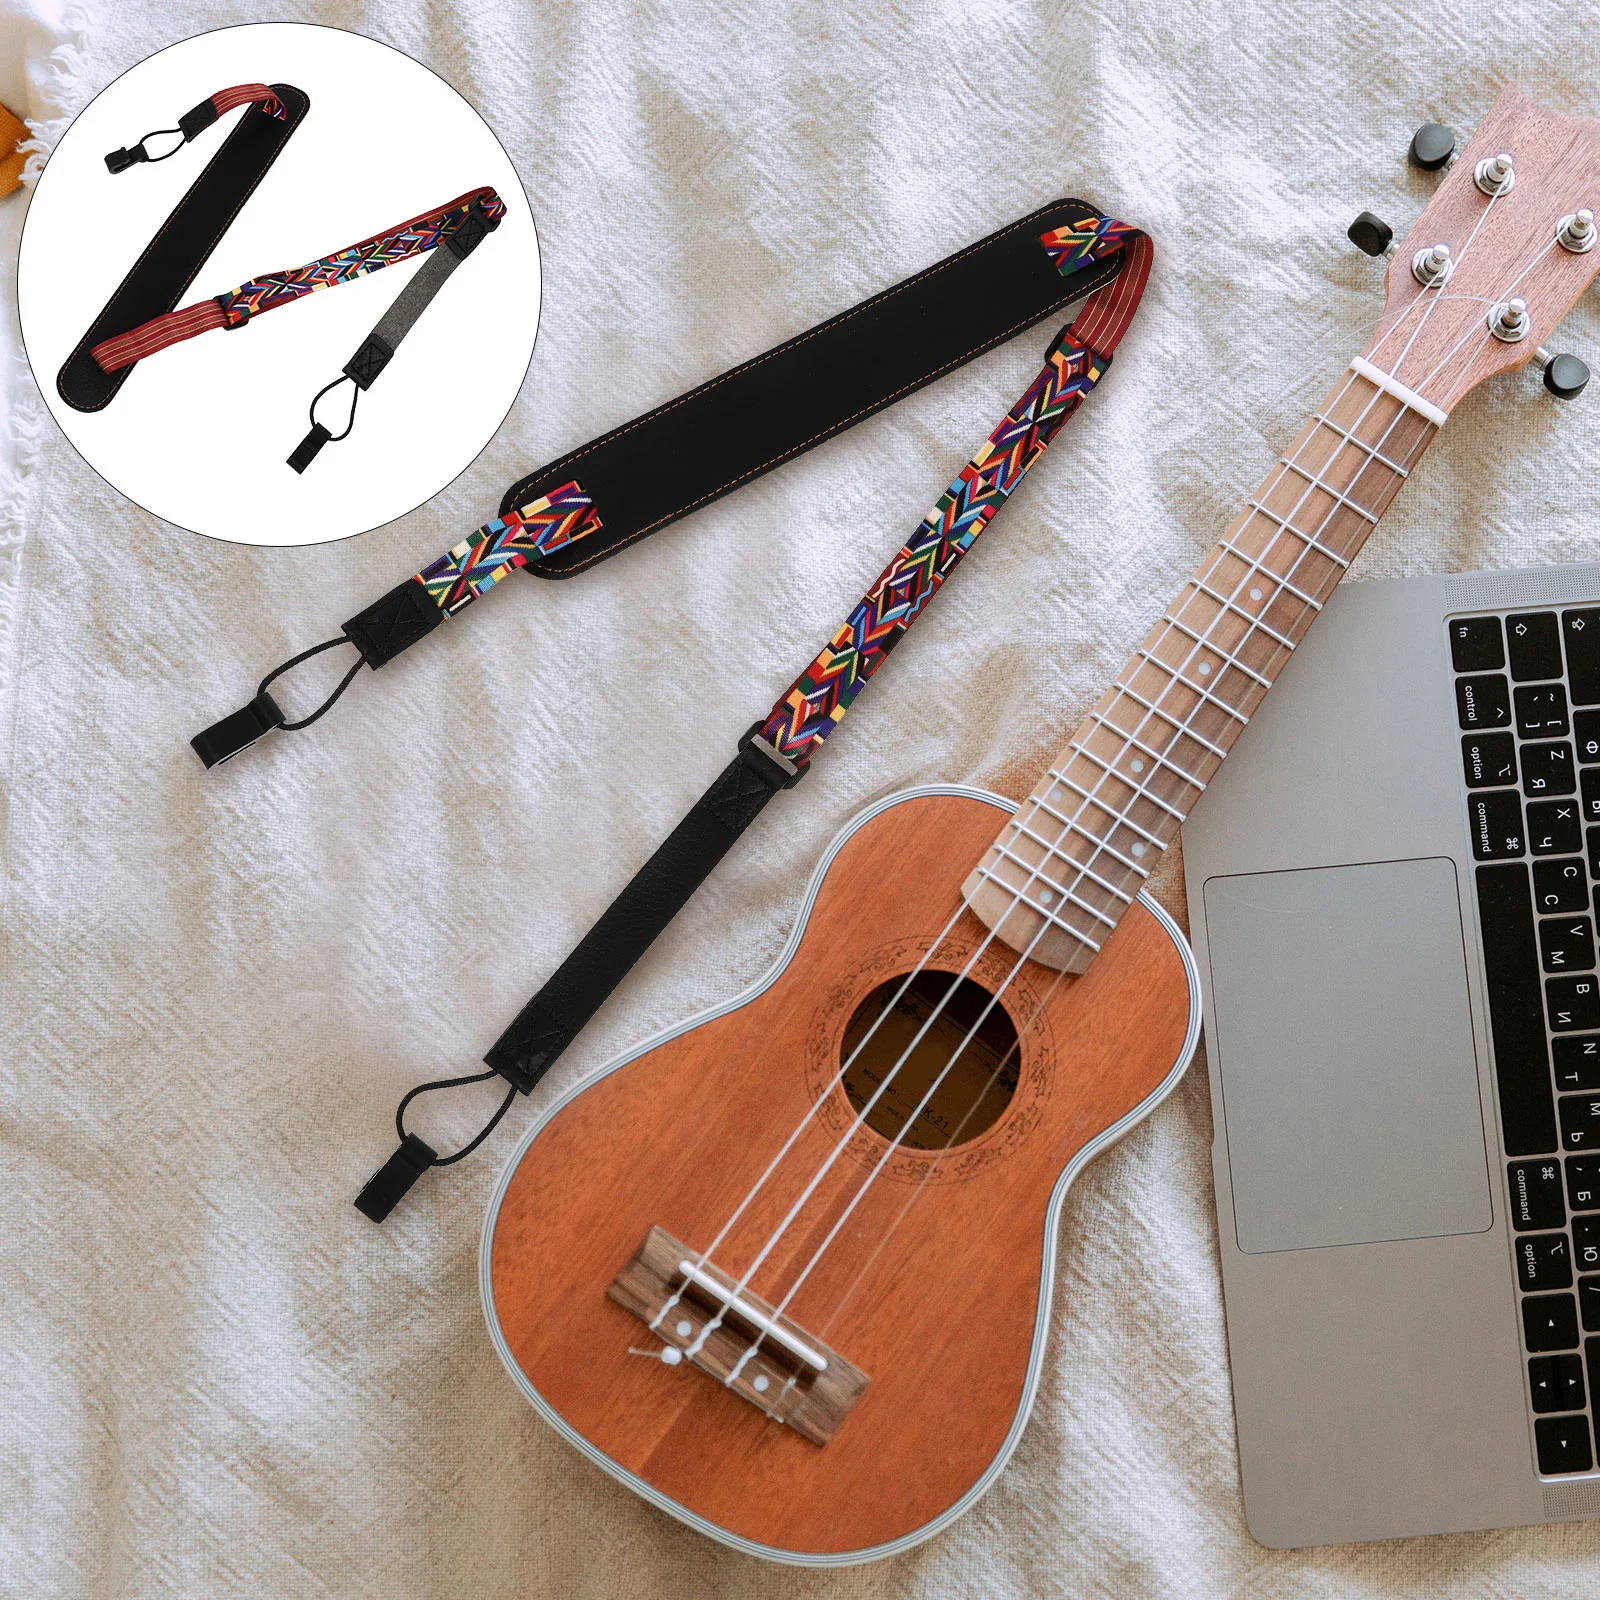 

1 Pc Comfortable Cotton Carrying Strap Lanyard for Stringed Instrument Ukulele